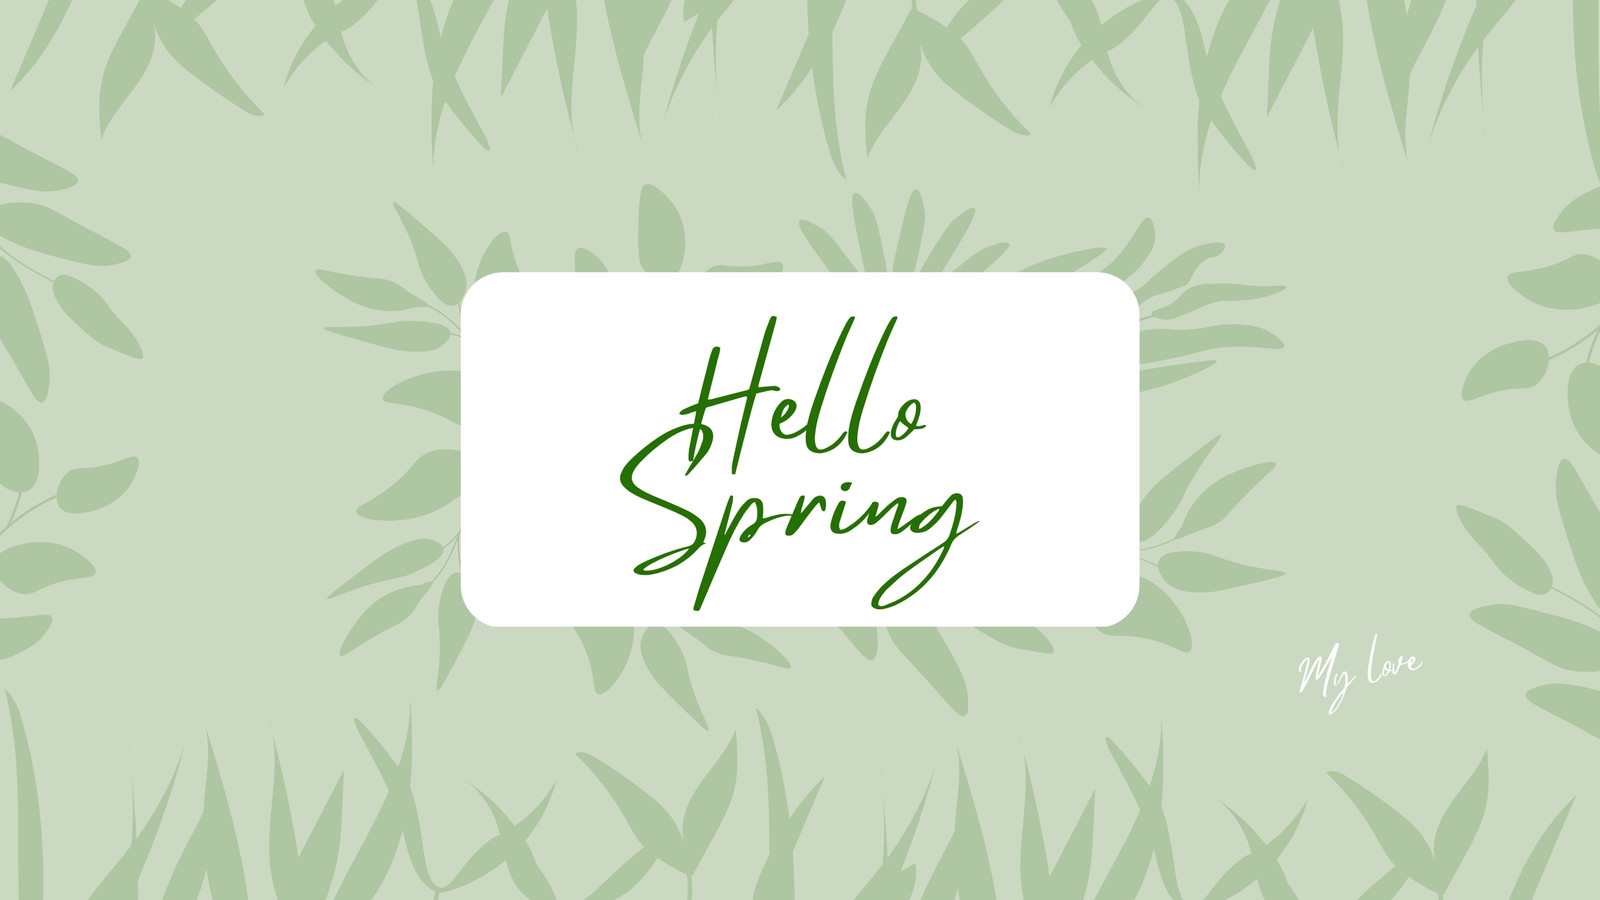 Page 4 - Free and customizable spring desktop wallpaper templates | Canva